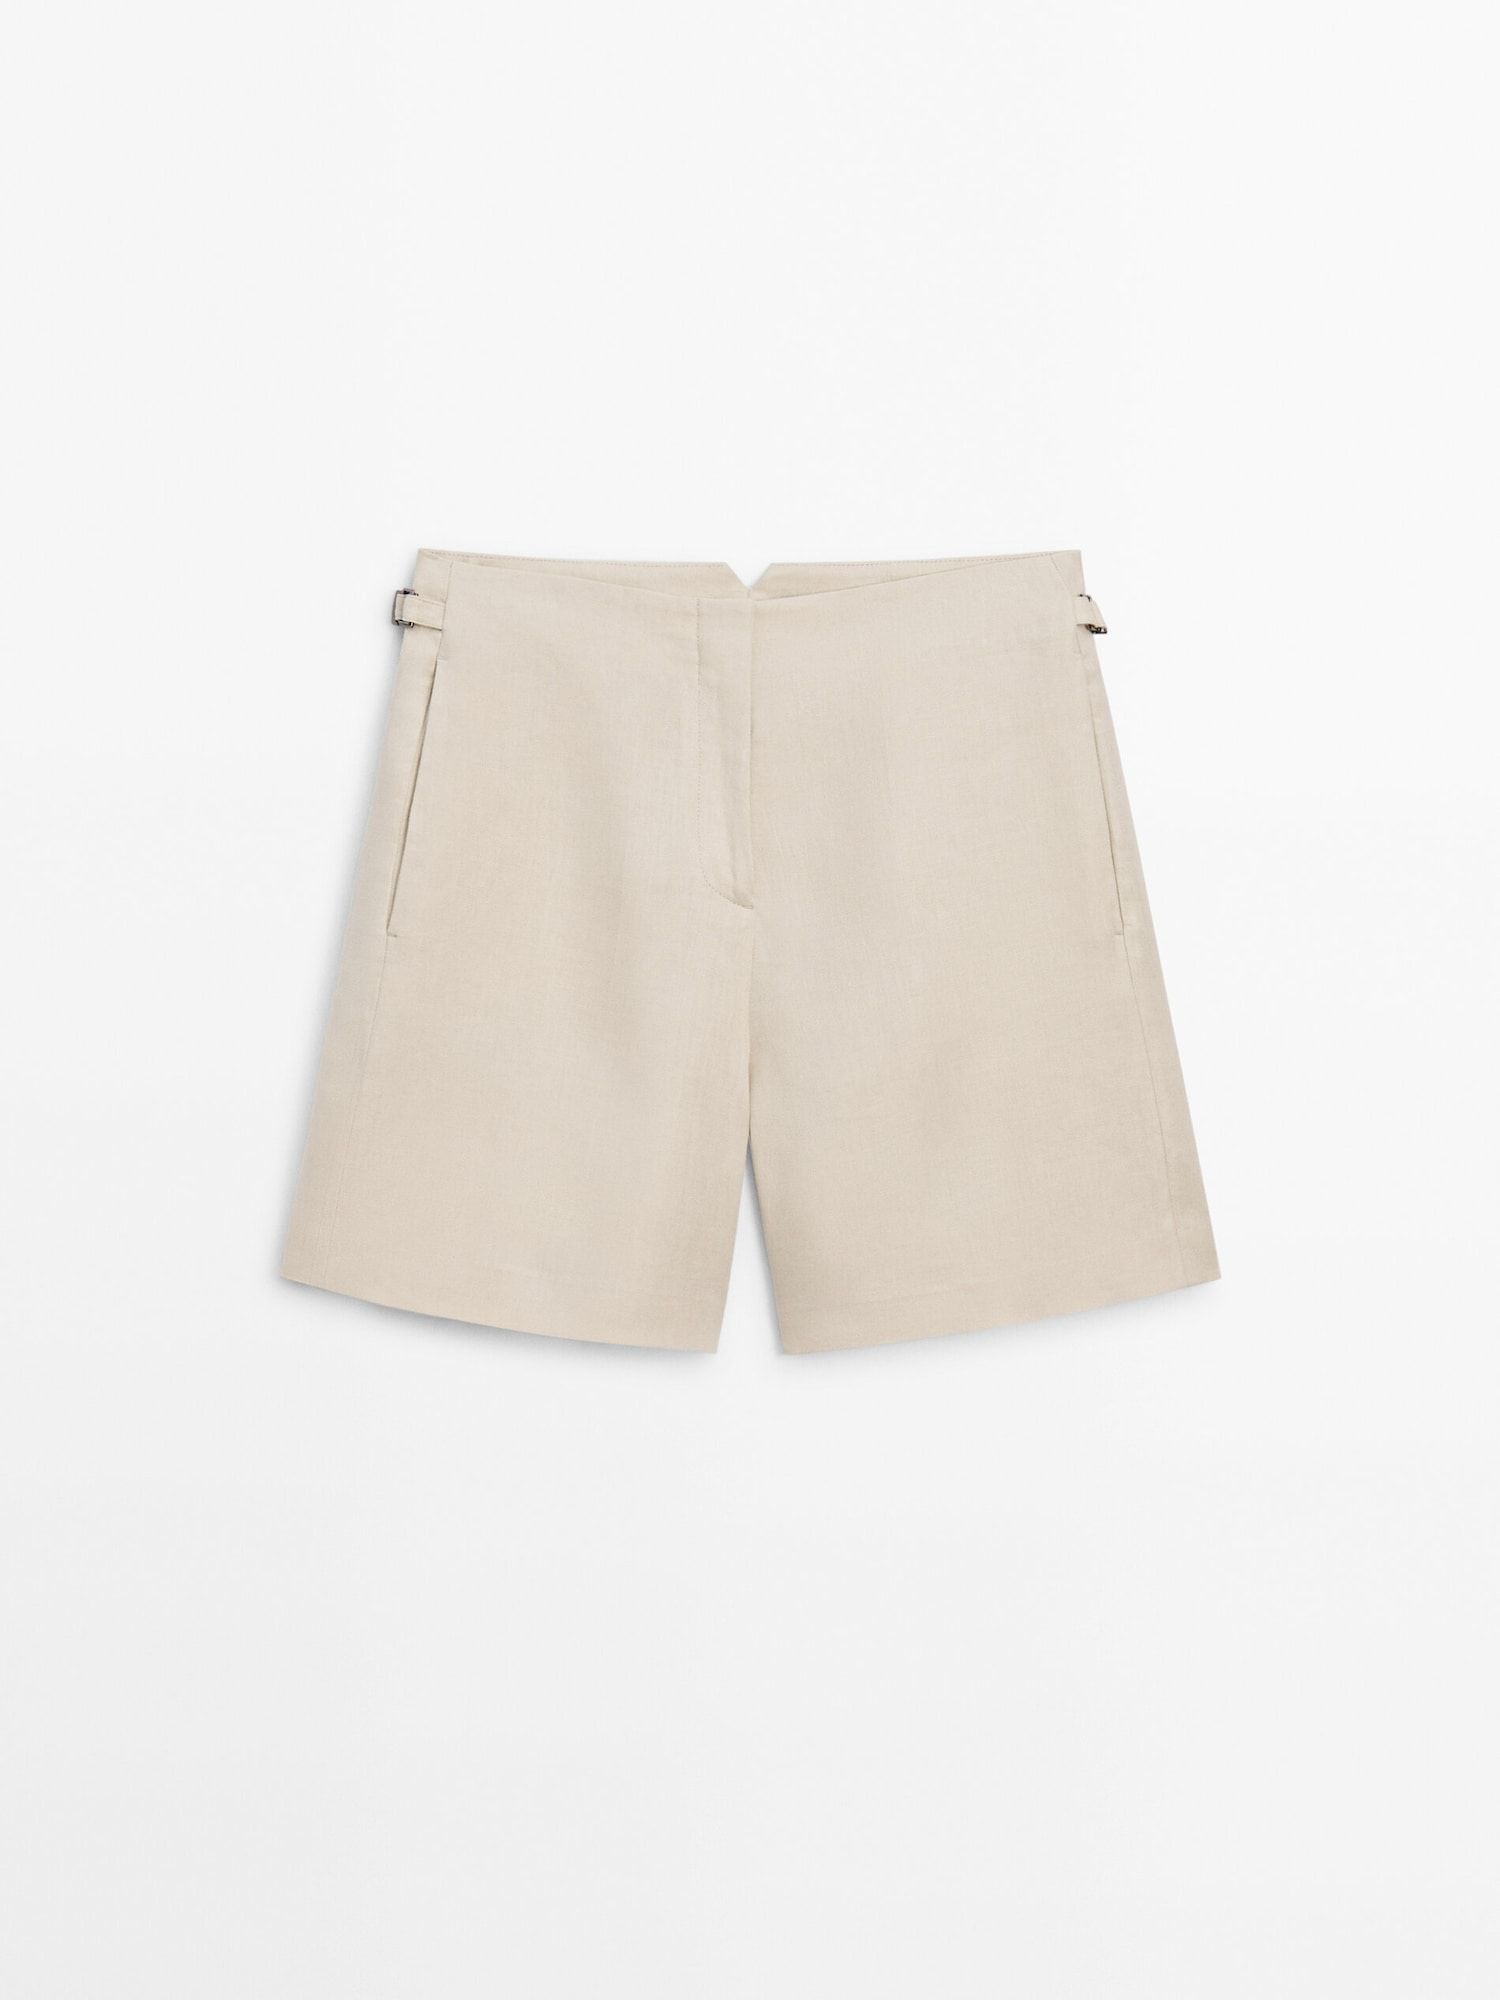 100% linen Bermuda shorts with buckles | Massimo Dutti (US)